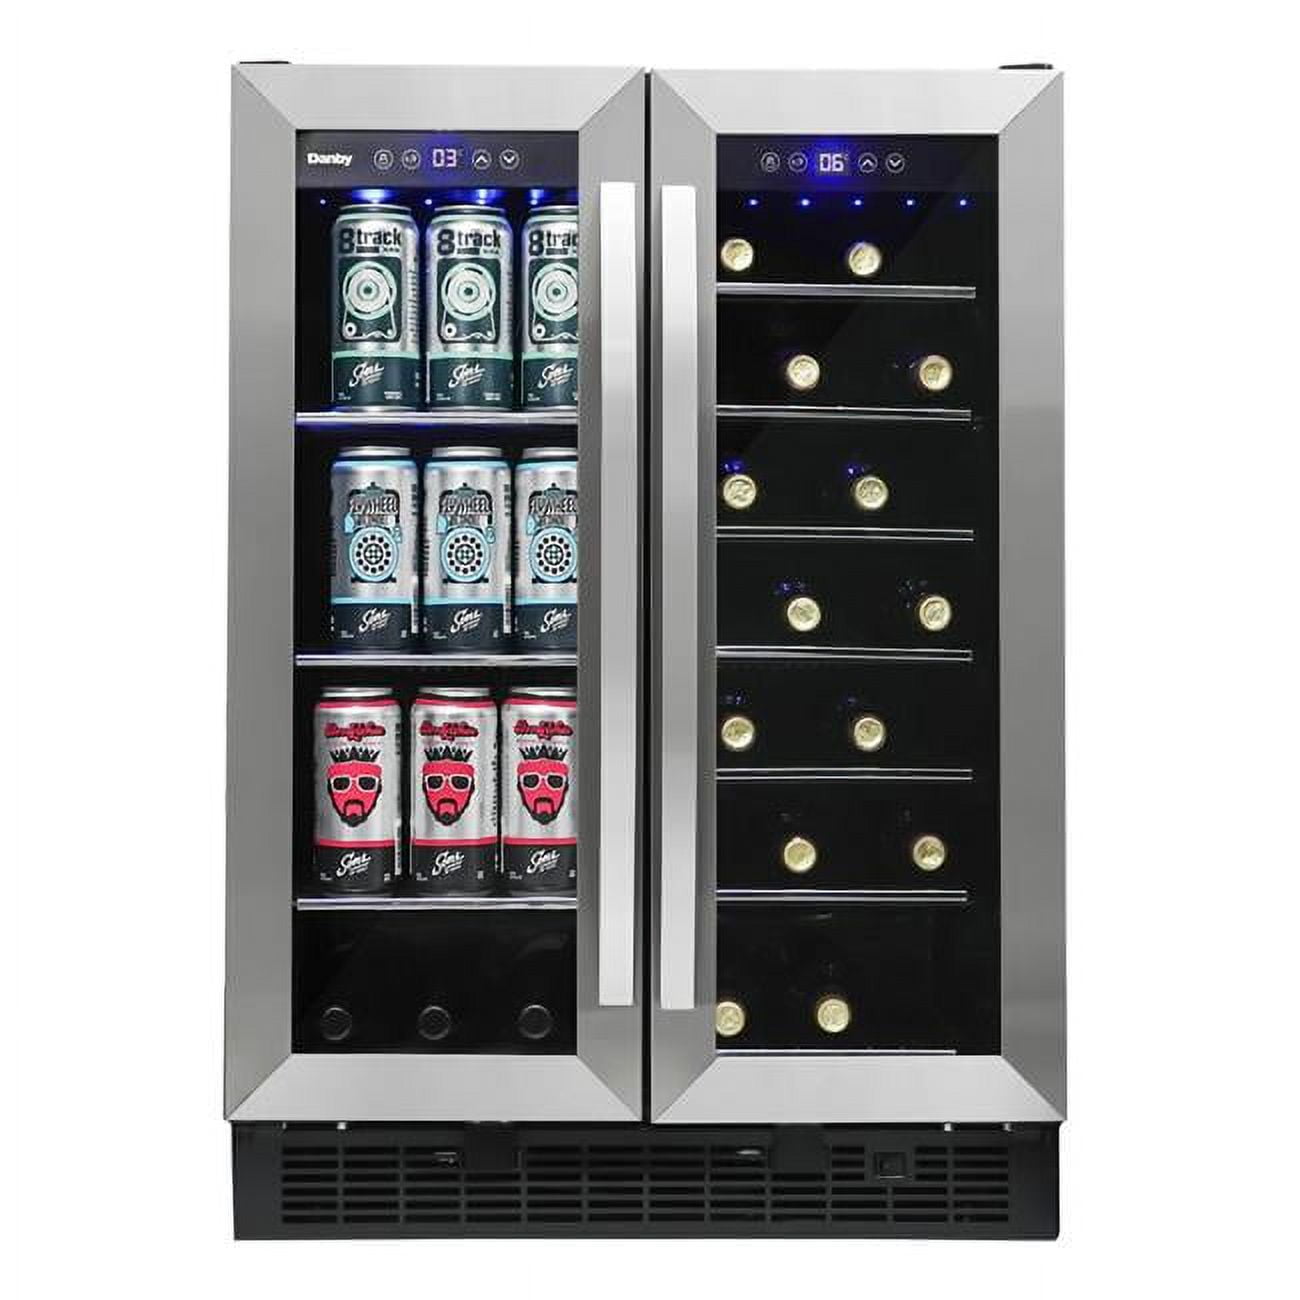 DBC052A1BSS 5.2 cu. ft. Built-in Beverage Center - Stainless Steel -  Danby